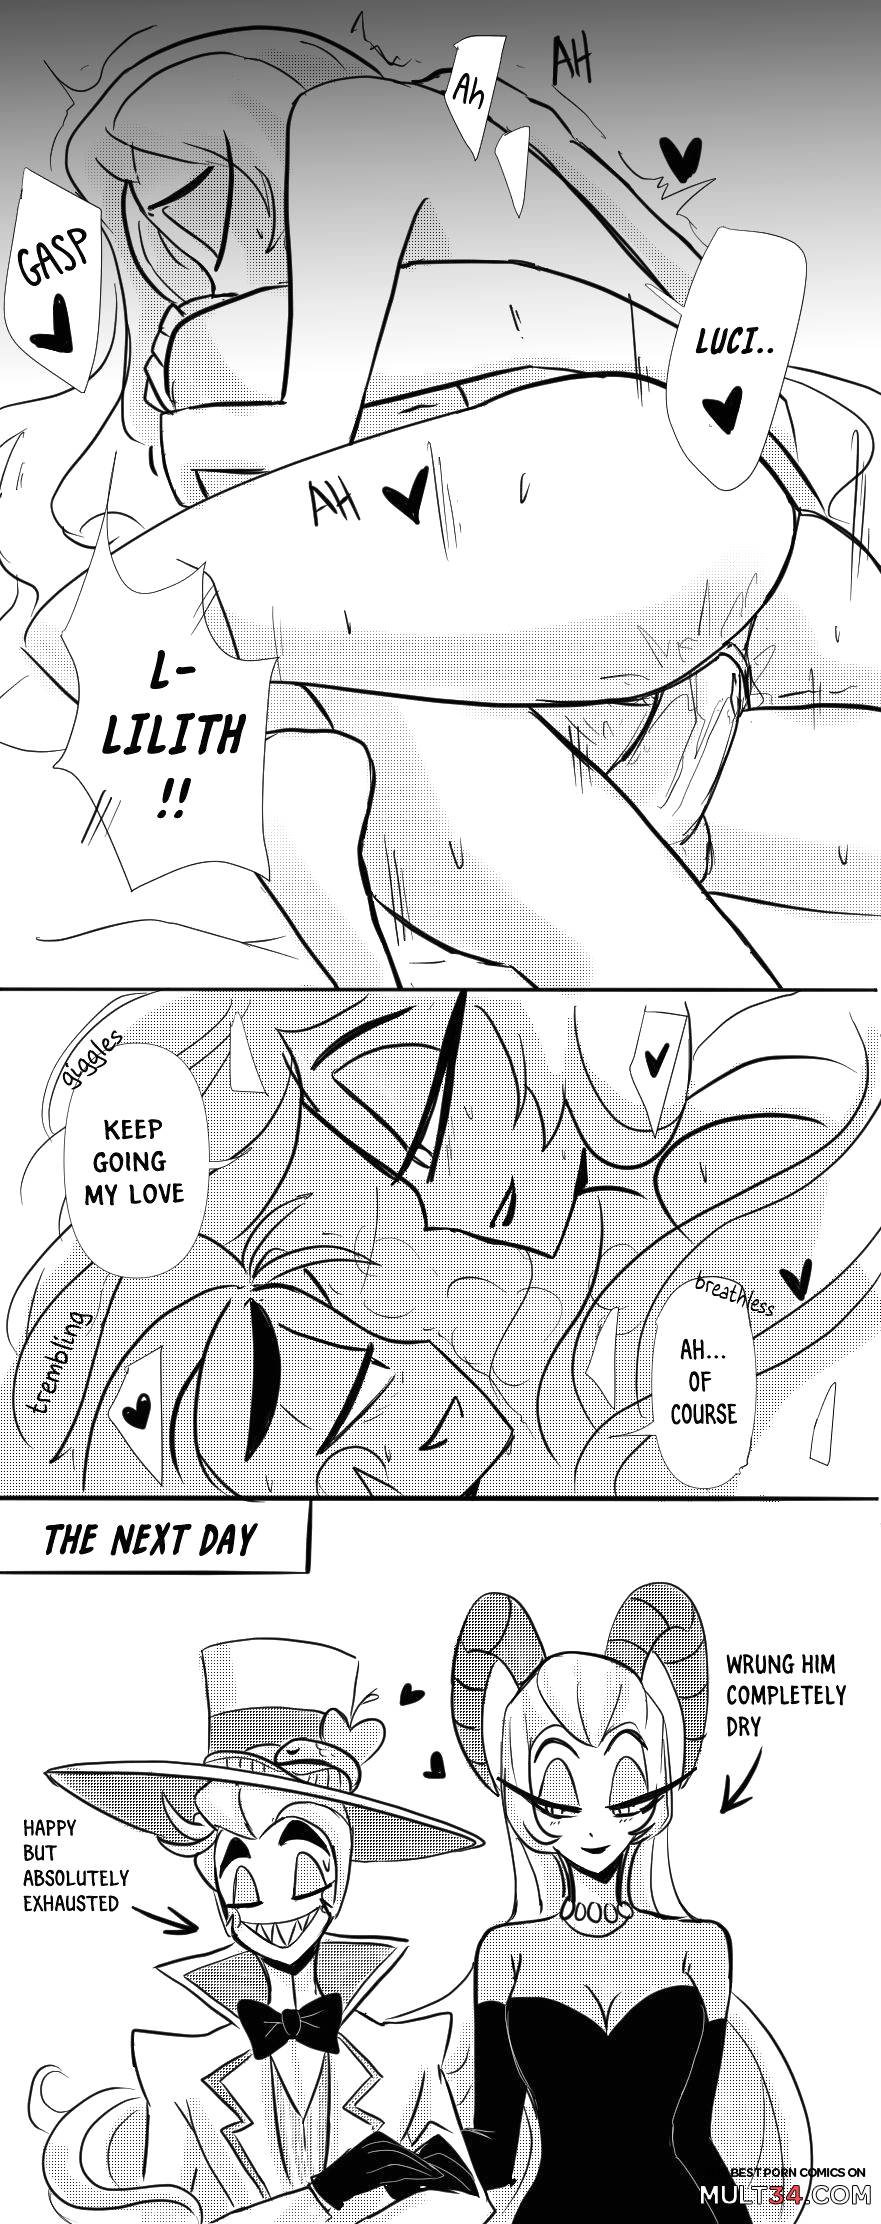 Lucifer and lilith page 10